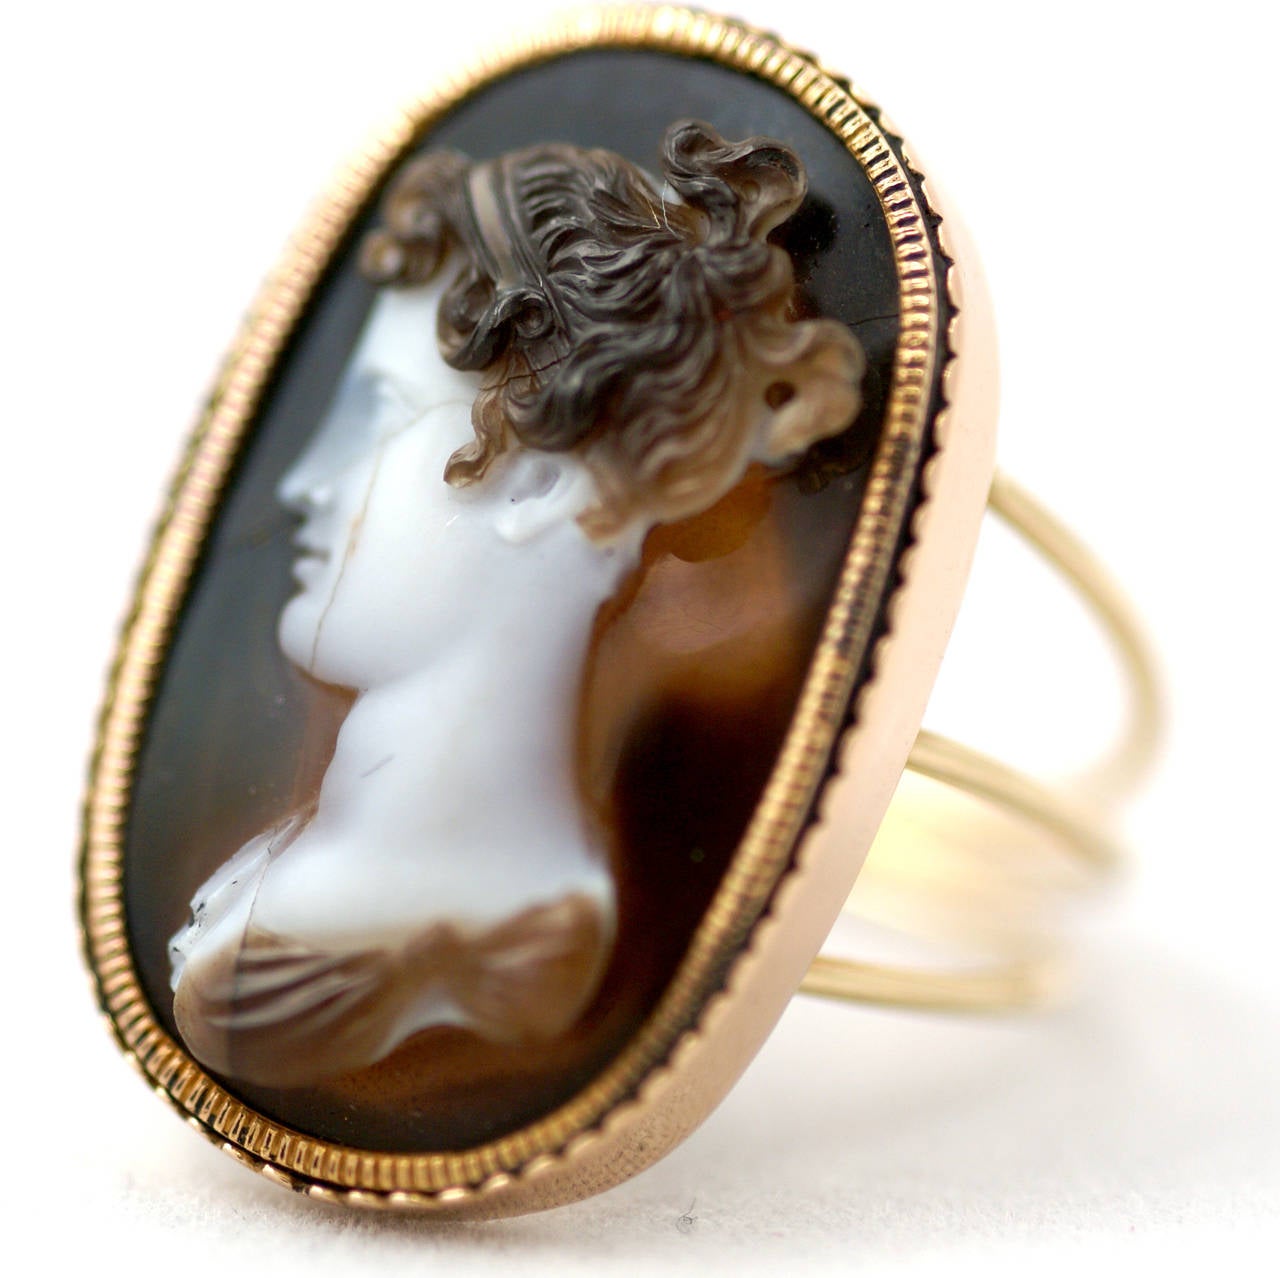 A sophisticated antique Cameo ring representing a woman’s portrait. Late 19th century.